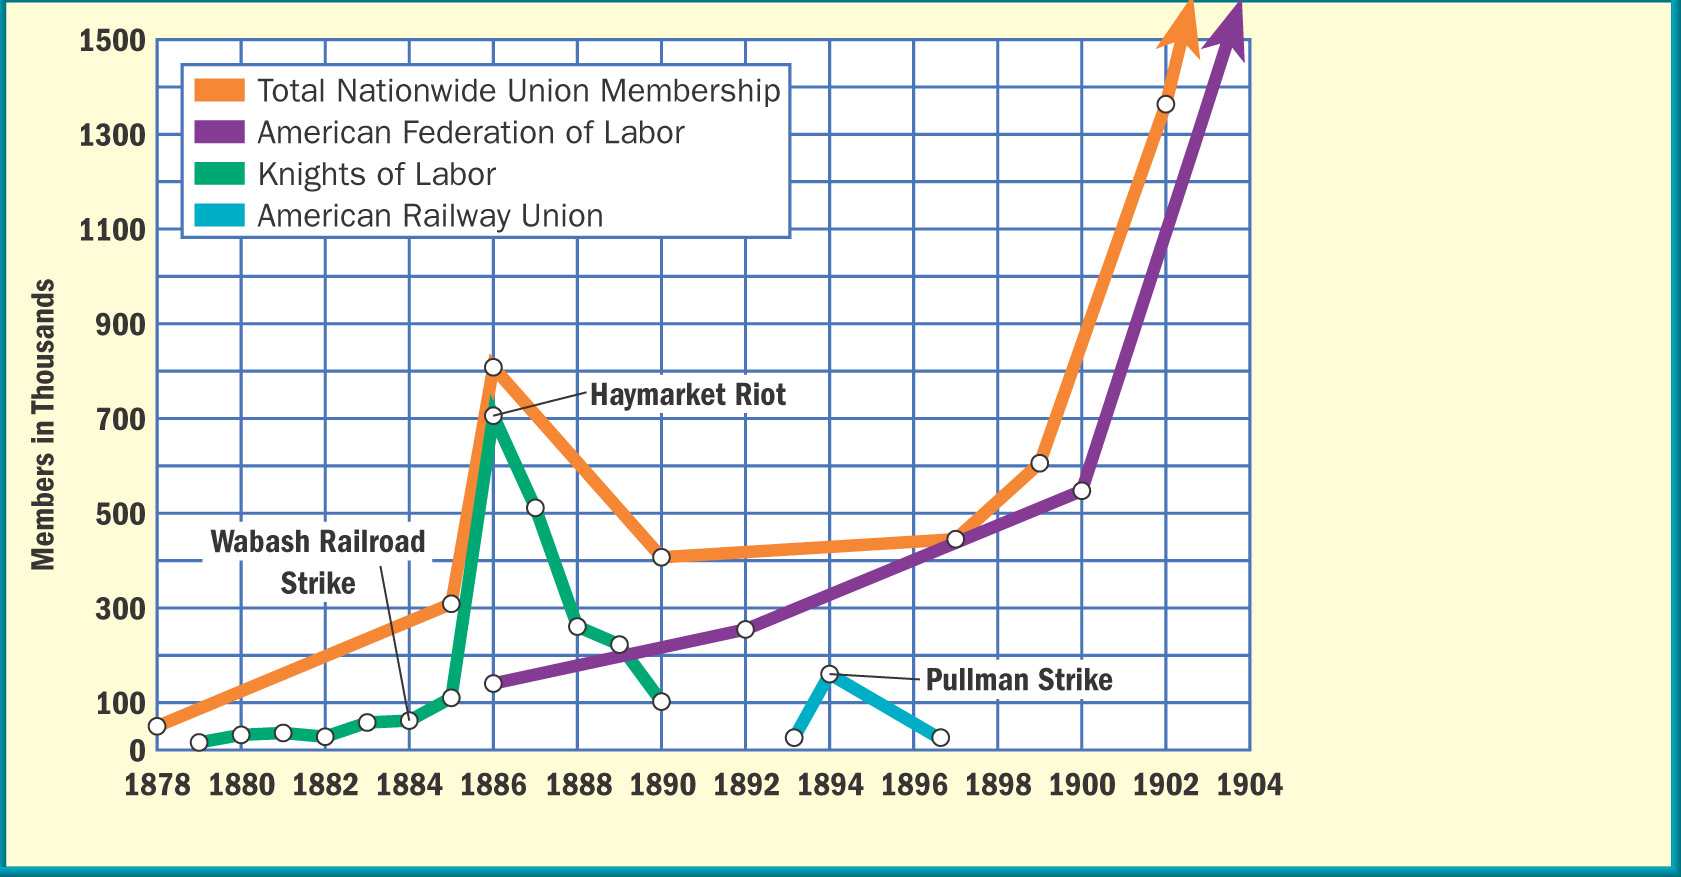 A graph compares union membership from 1878 to 1904.